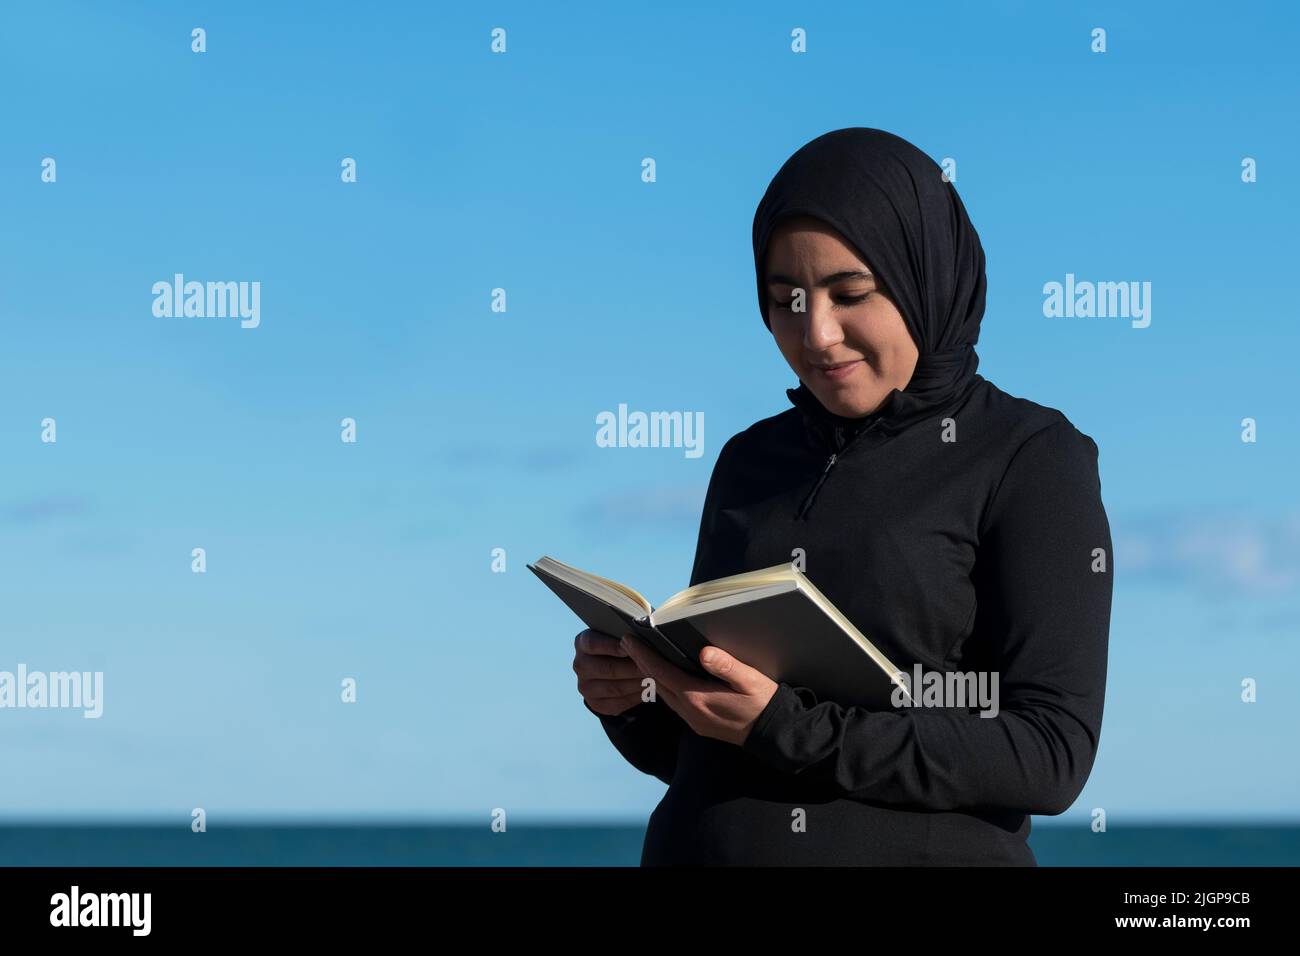 Muslim woman with a hijab reading a book outdoors. Stock Photo